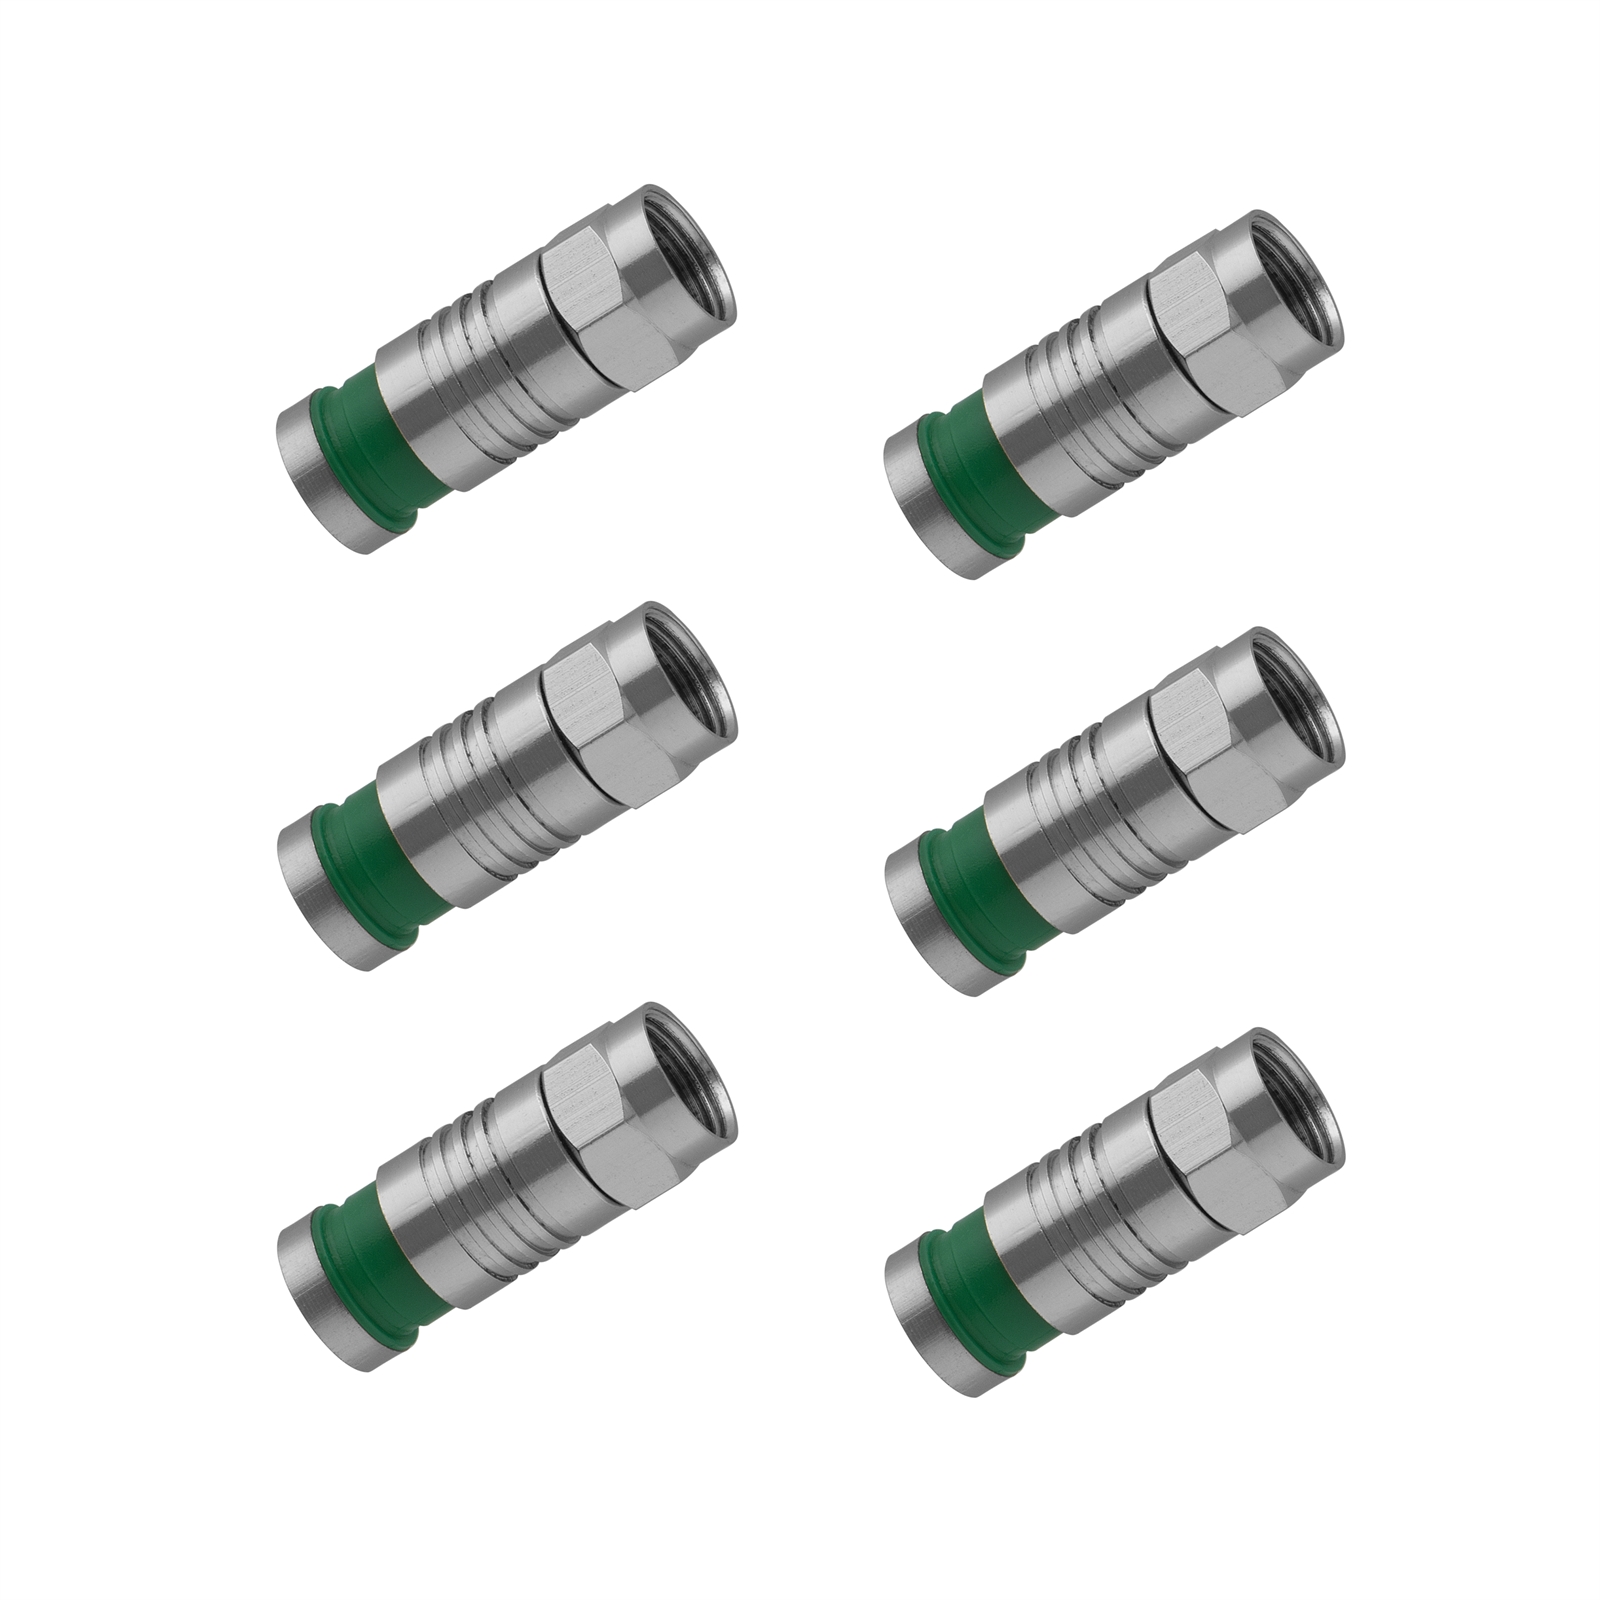 ANTSIG Compression F-Connector - 6 Pack